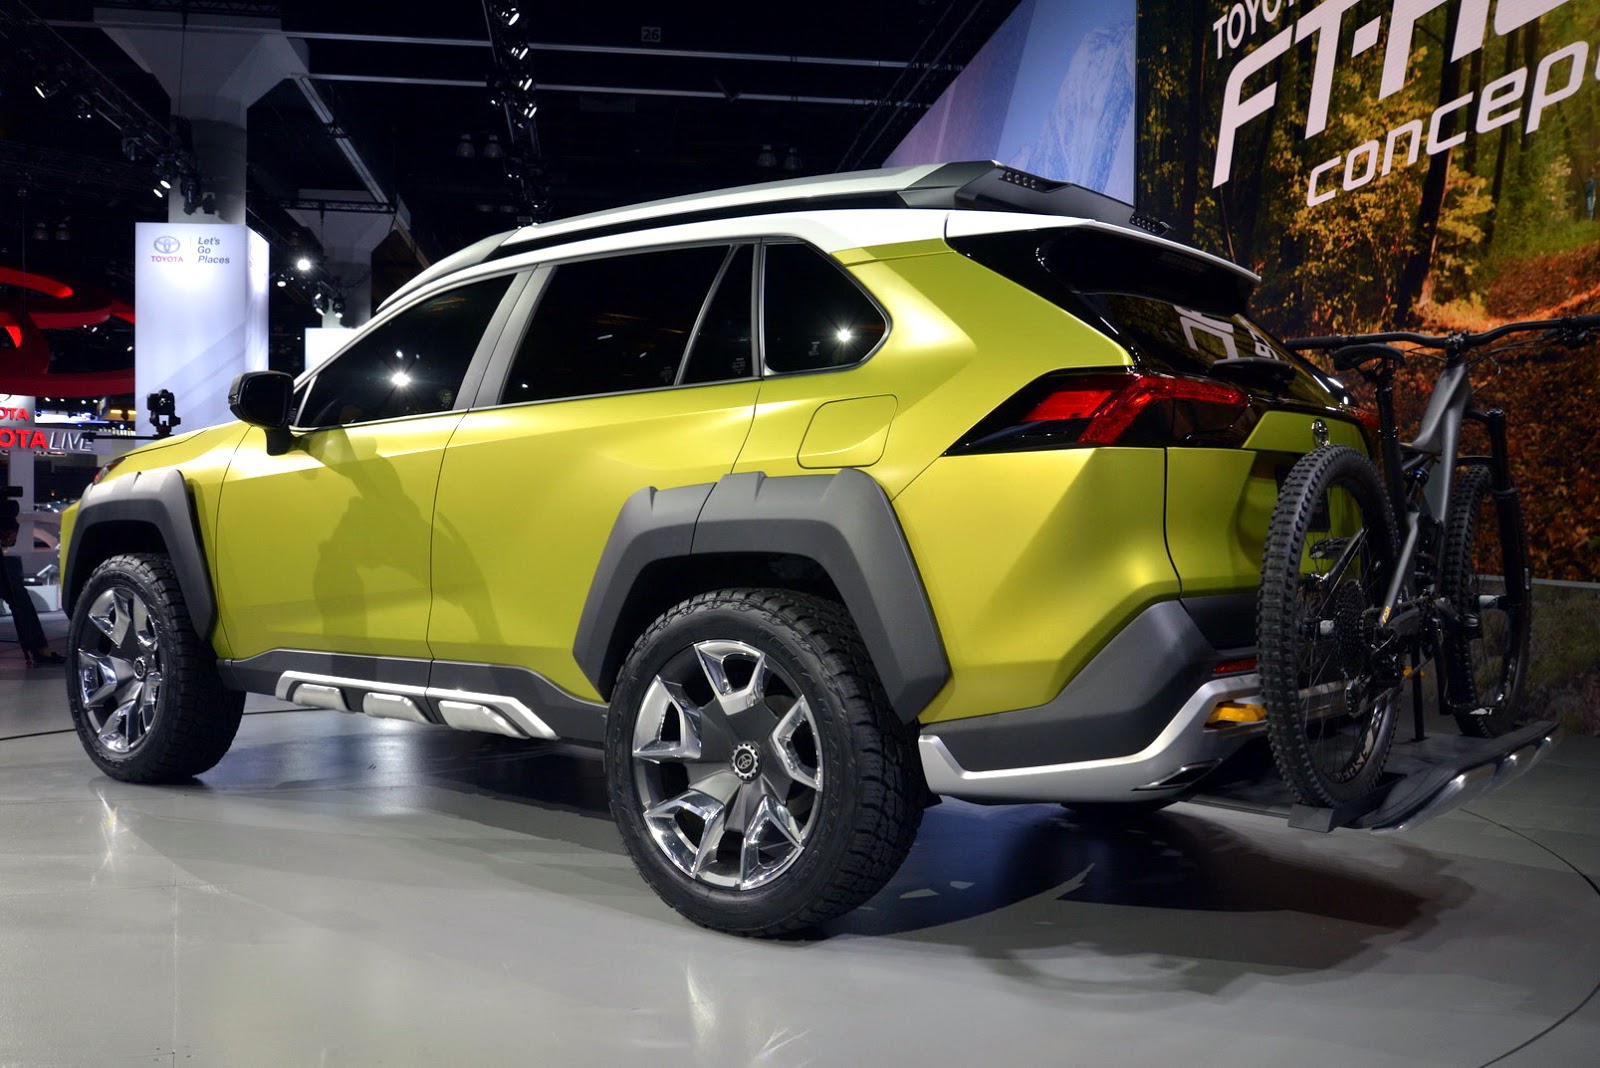 New Toyota FTAC Concept Is A Macho Compact SUV For Adventurers Carscoops